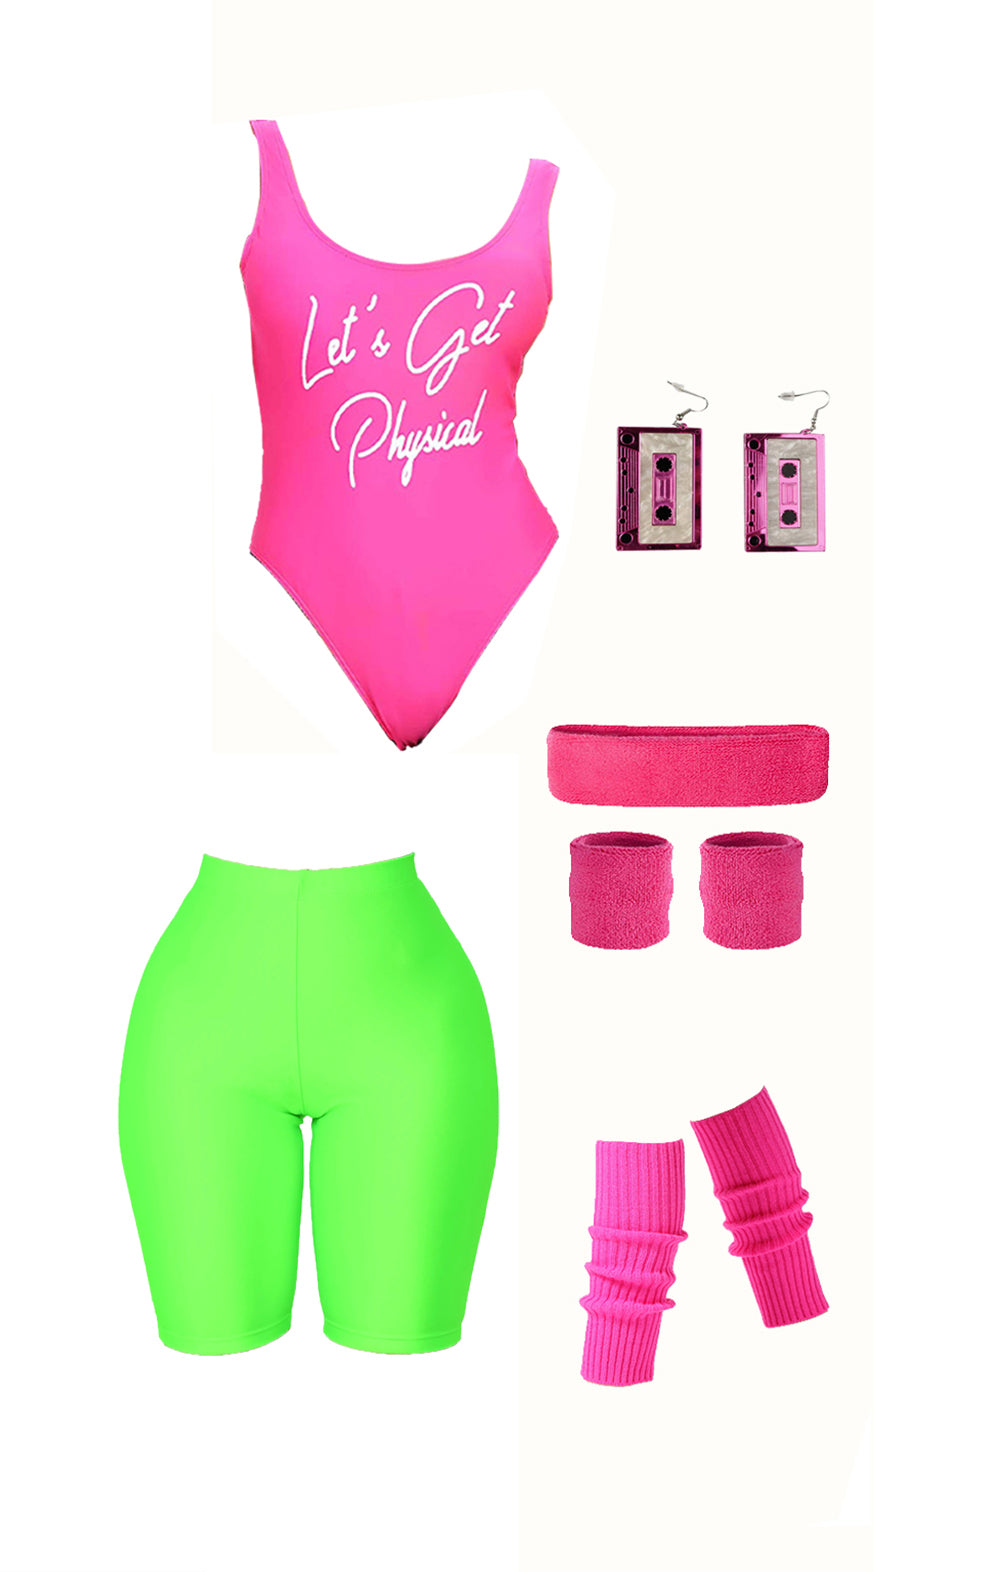 80s Workout Costume Outfit for Women 80s Accessories Set Neon